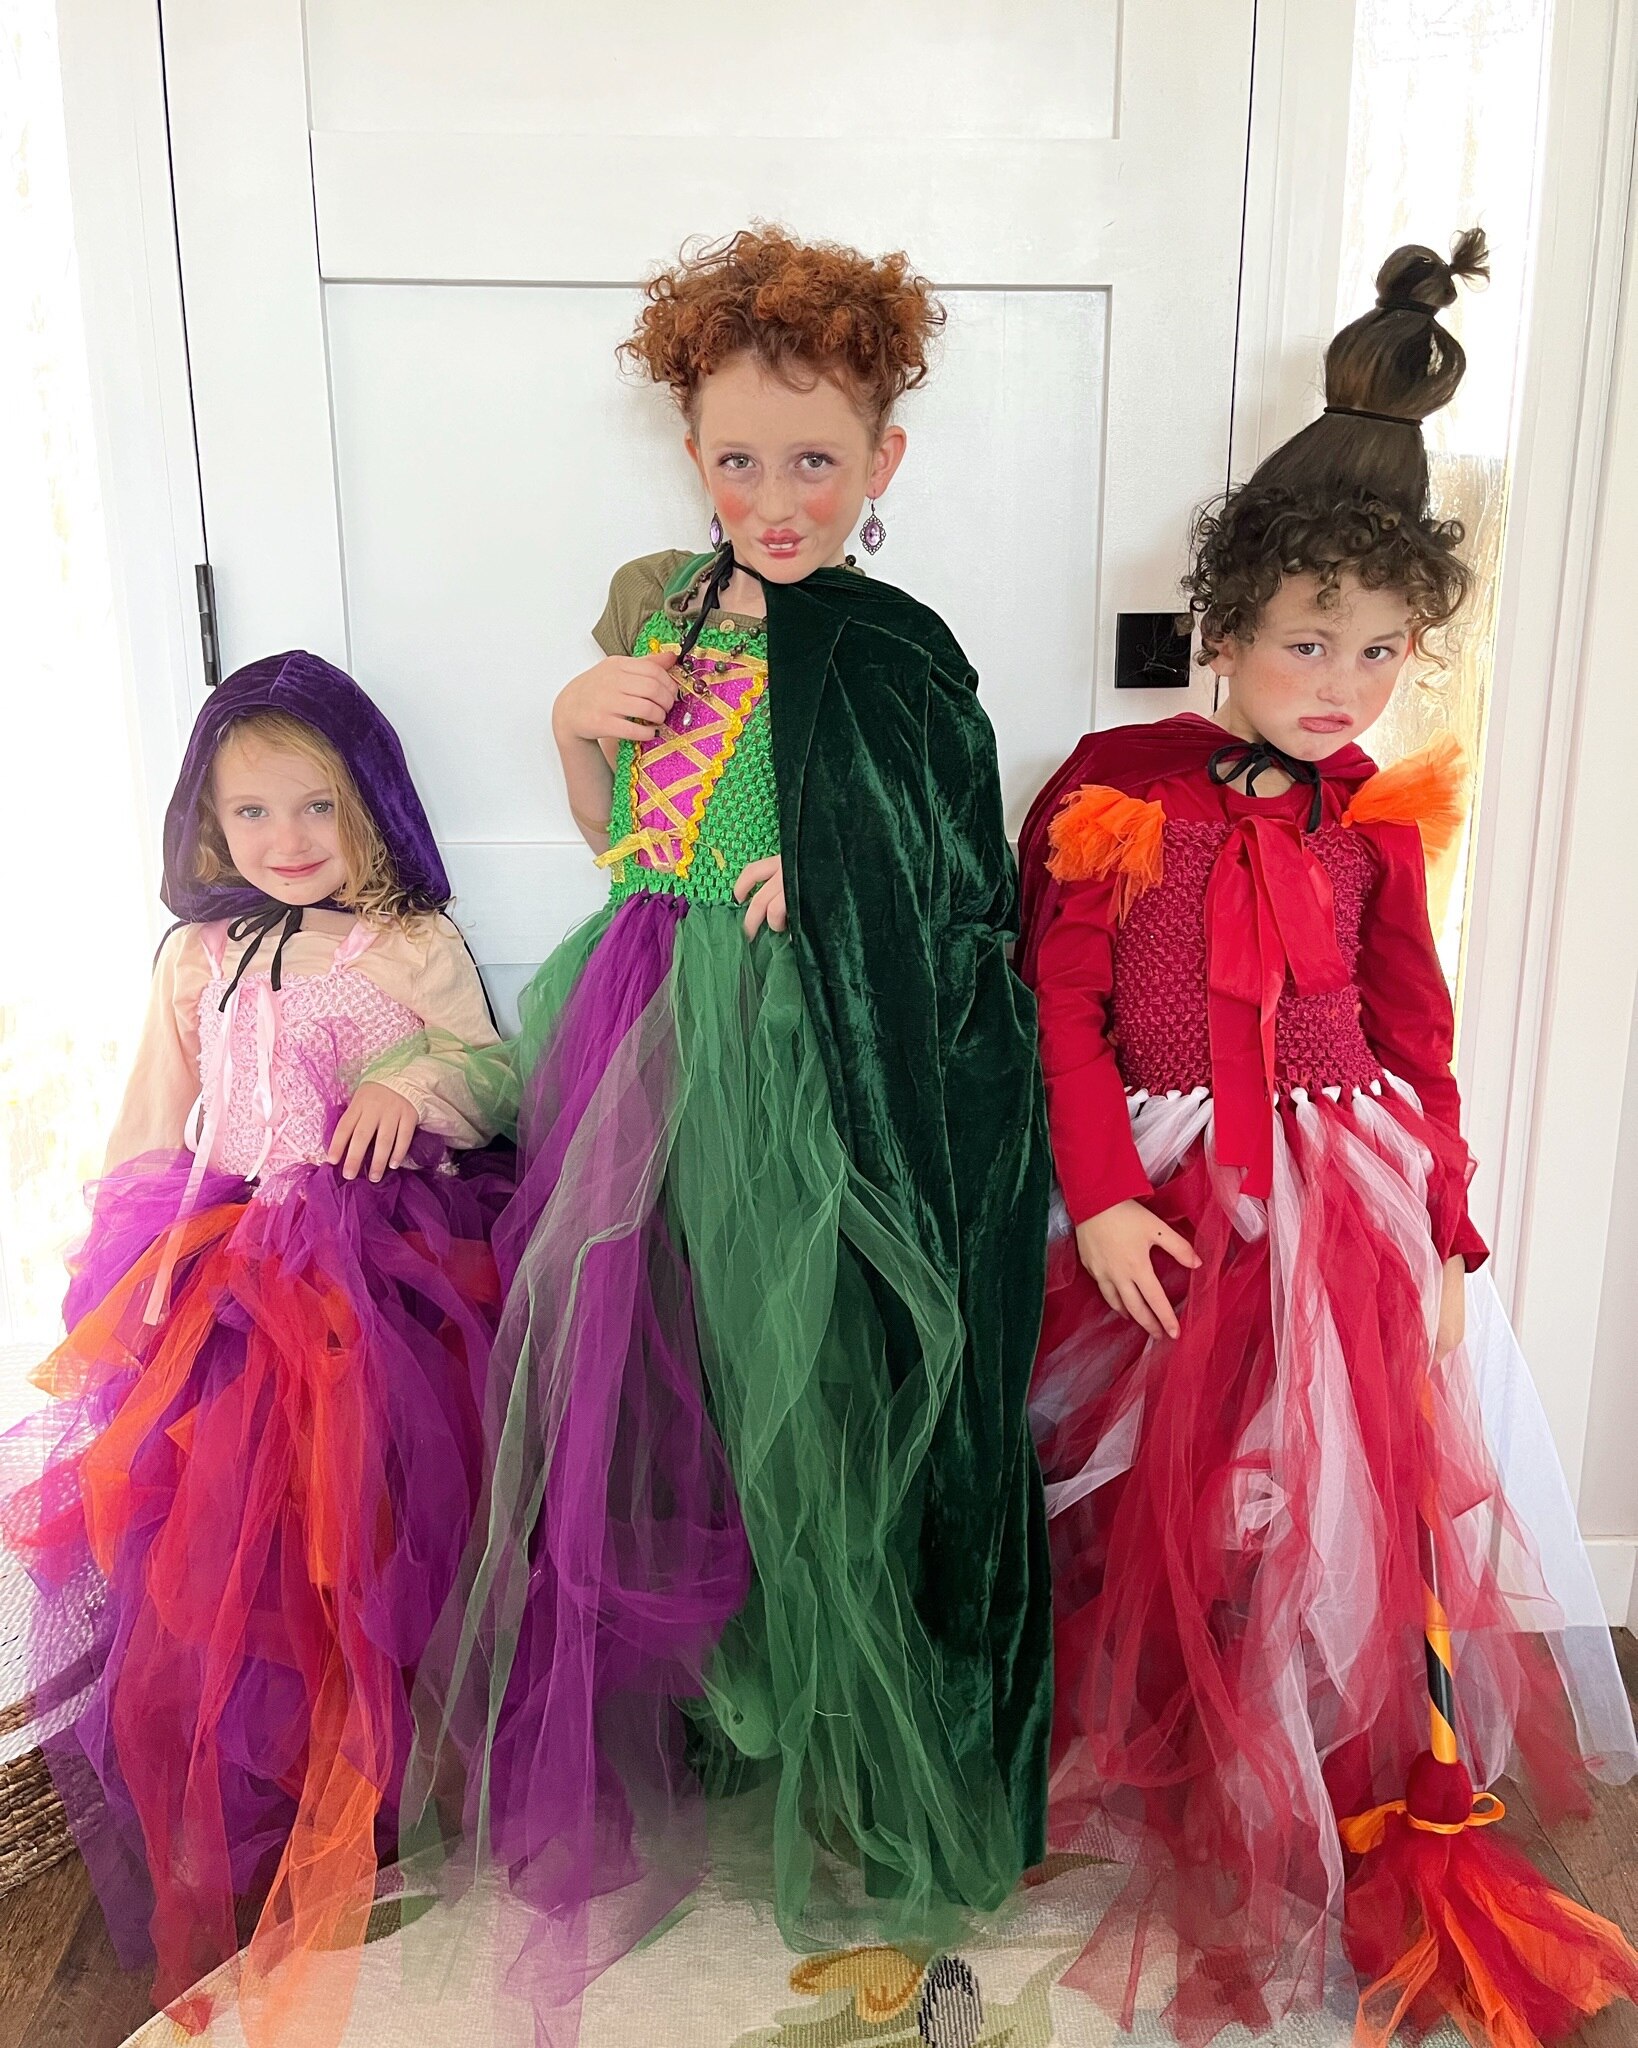 My 3 little witches!! The Sanderson ”sistaaas” 